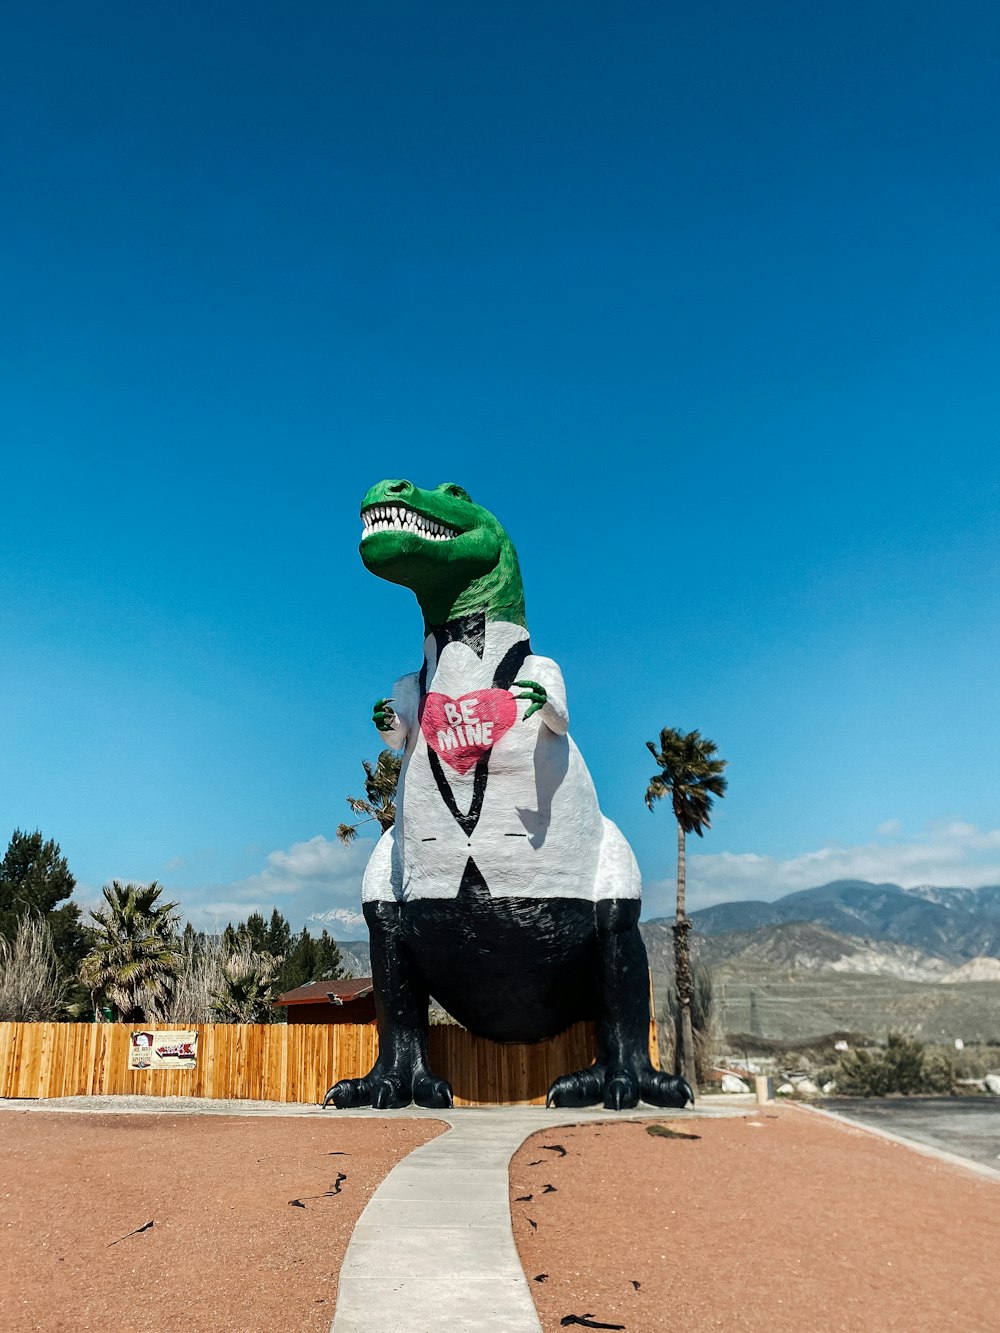 a large inflatable dinosaur sitting on top of a sidewalk